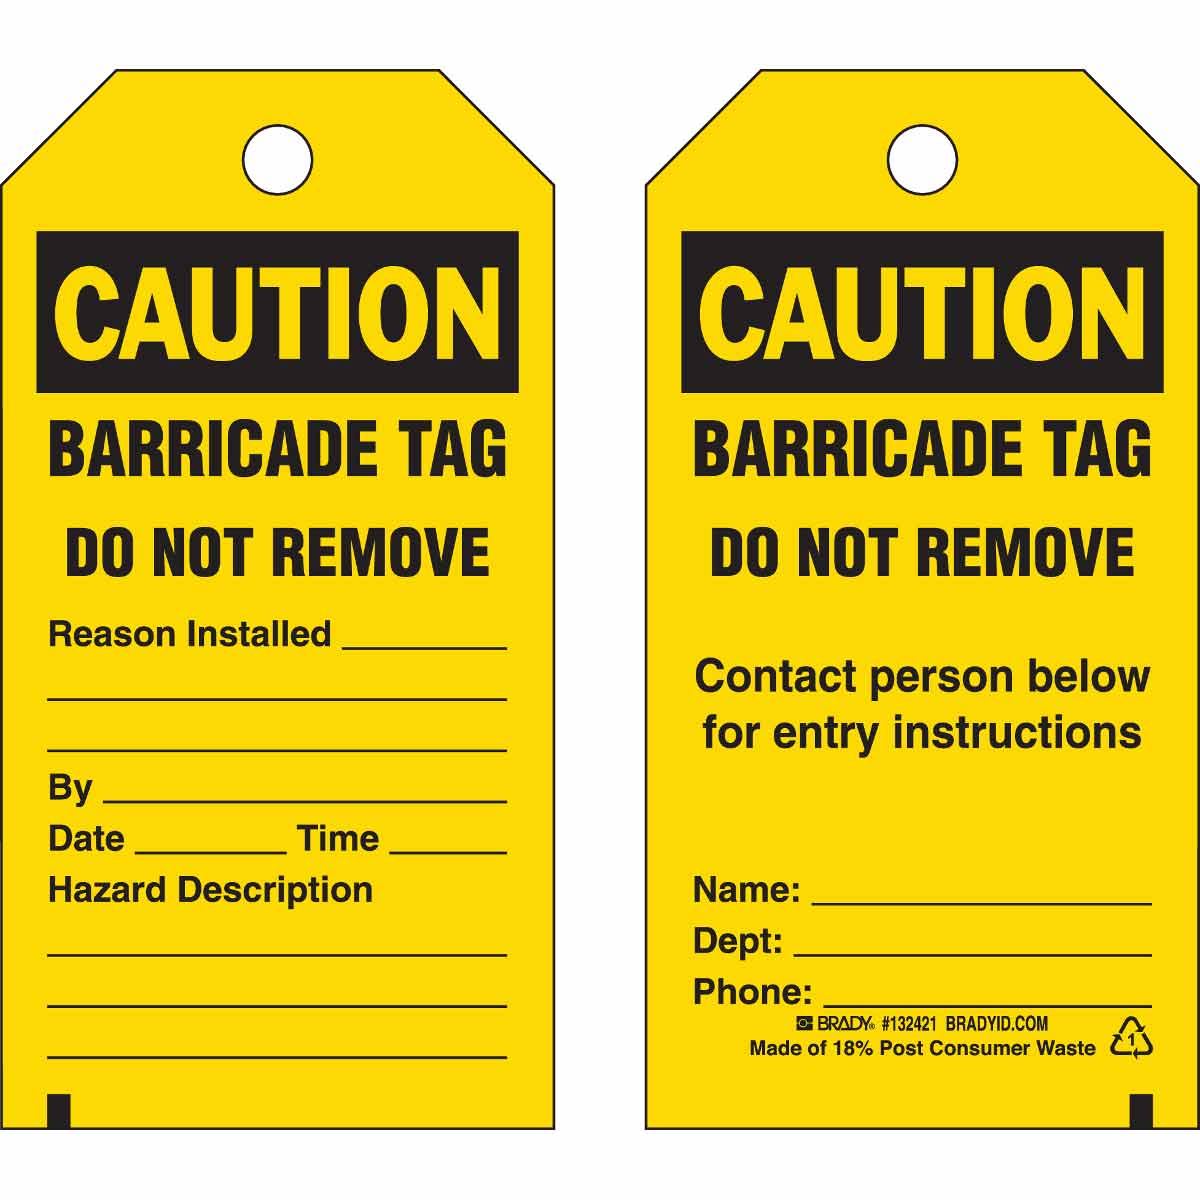 Brady® 132421 2-Sided Rectangular Barricade Tag, 5-3/4 in H x 3 in W, Black on Yellow, 3/8 in Hole, B-851 Polyester